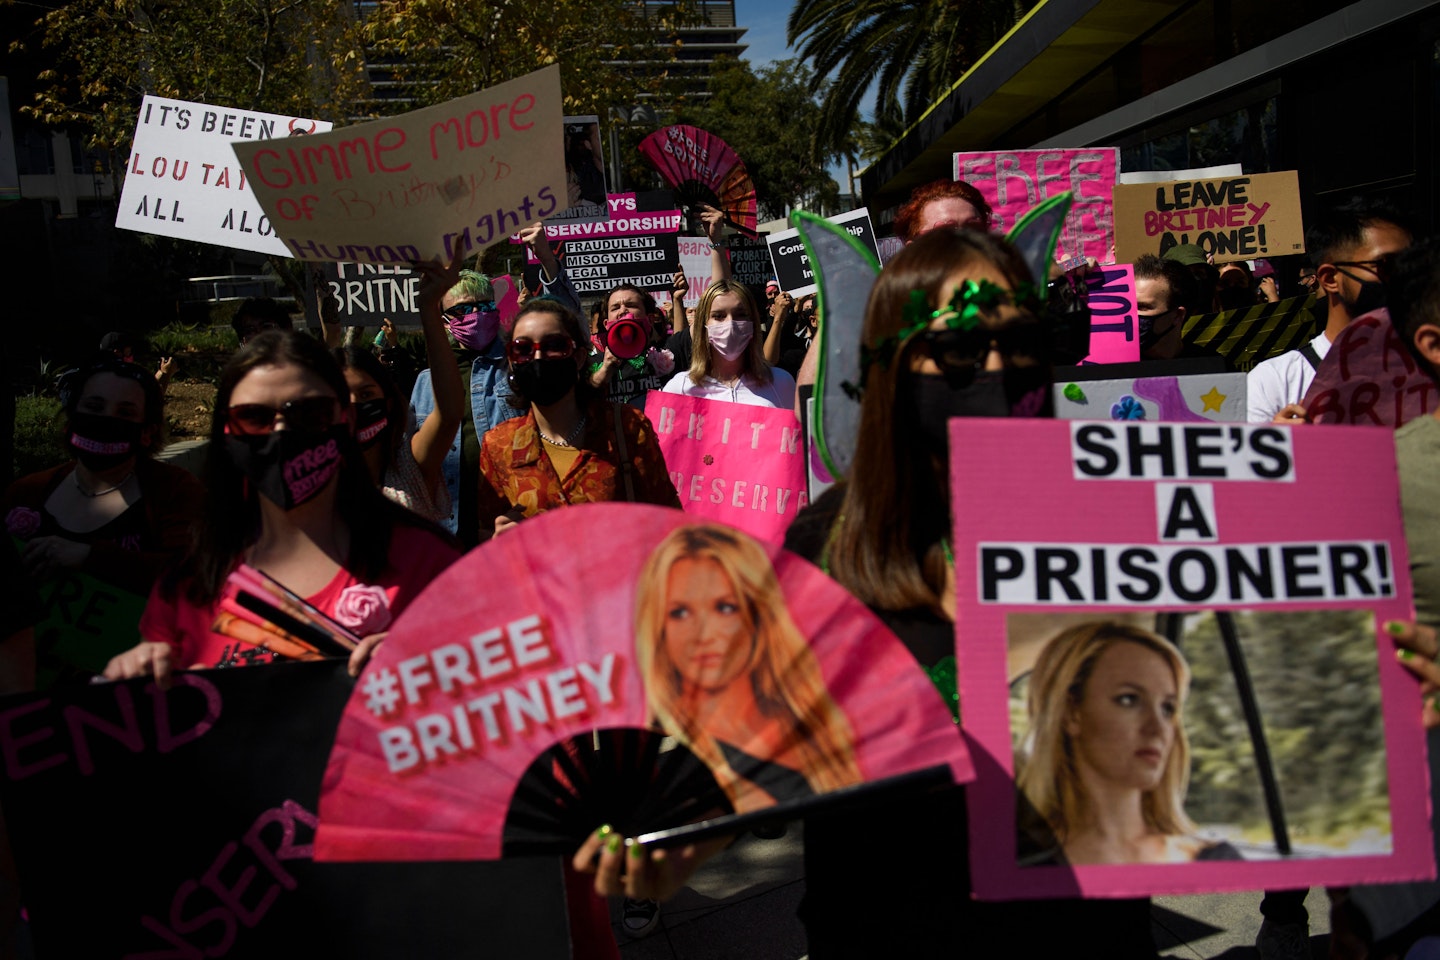 Protestors with Free Britney placards